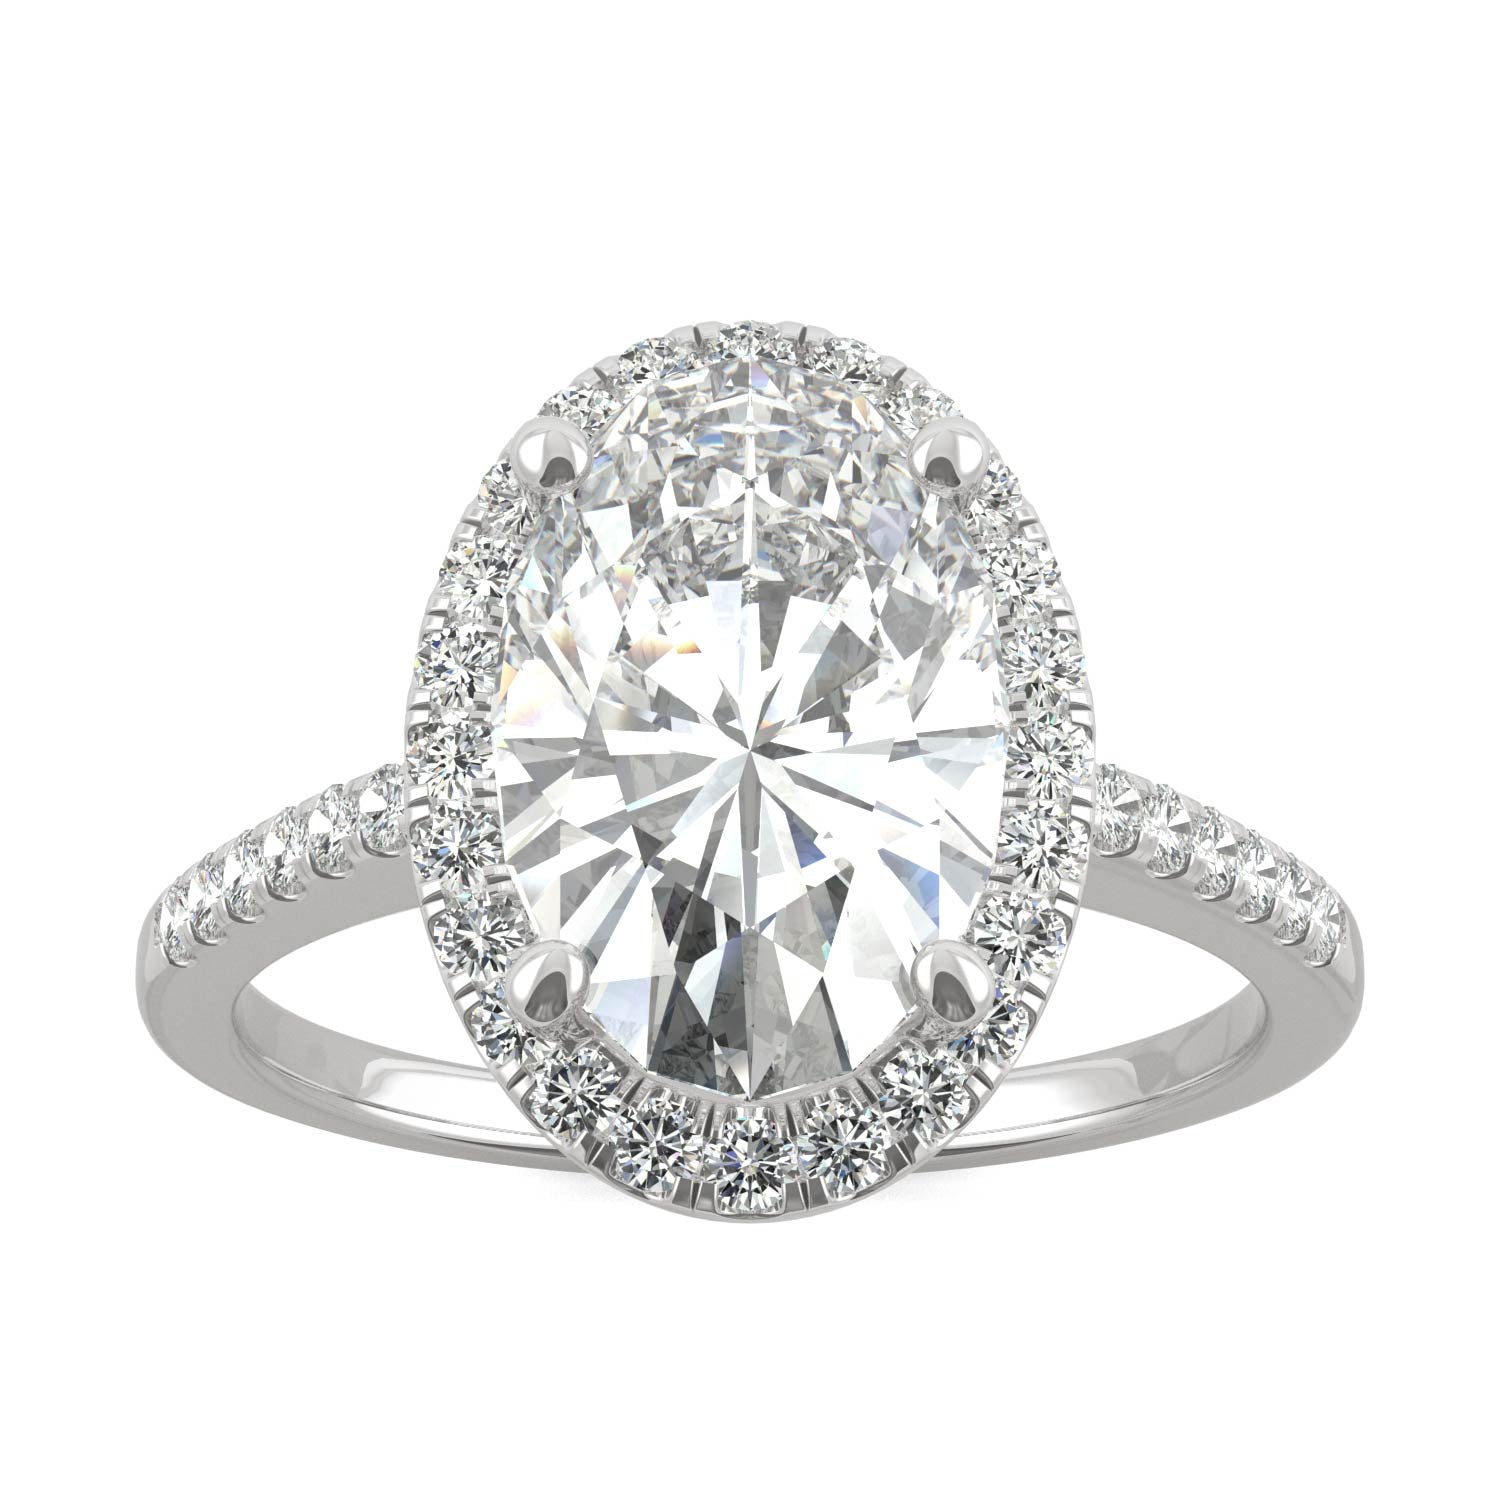 4.75 CTW DEW Elongated Oval Moissanite Halo Ring in 14K White Gold